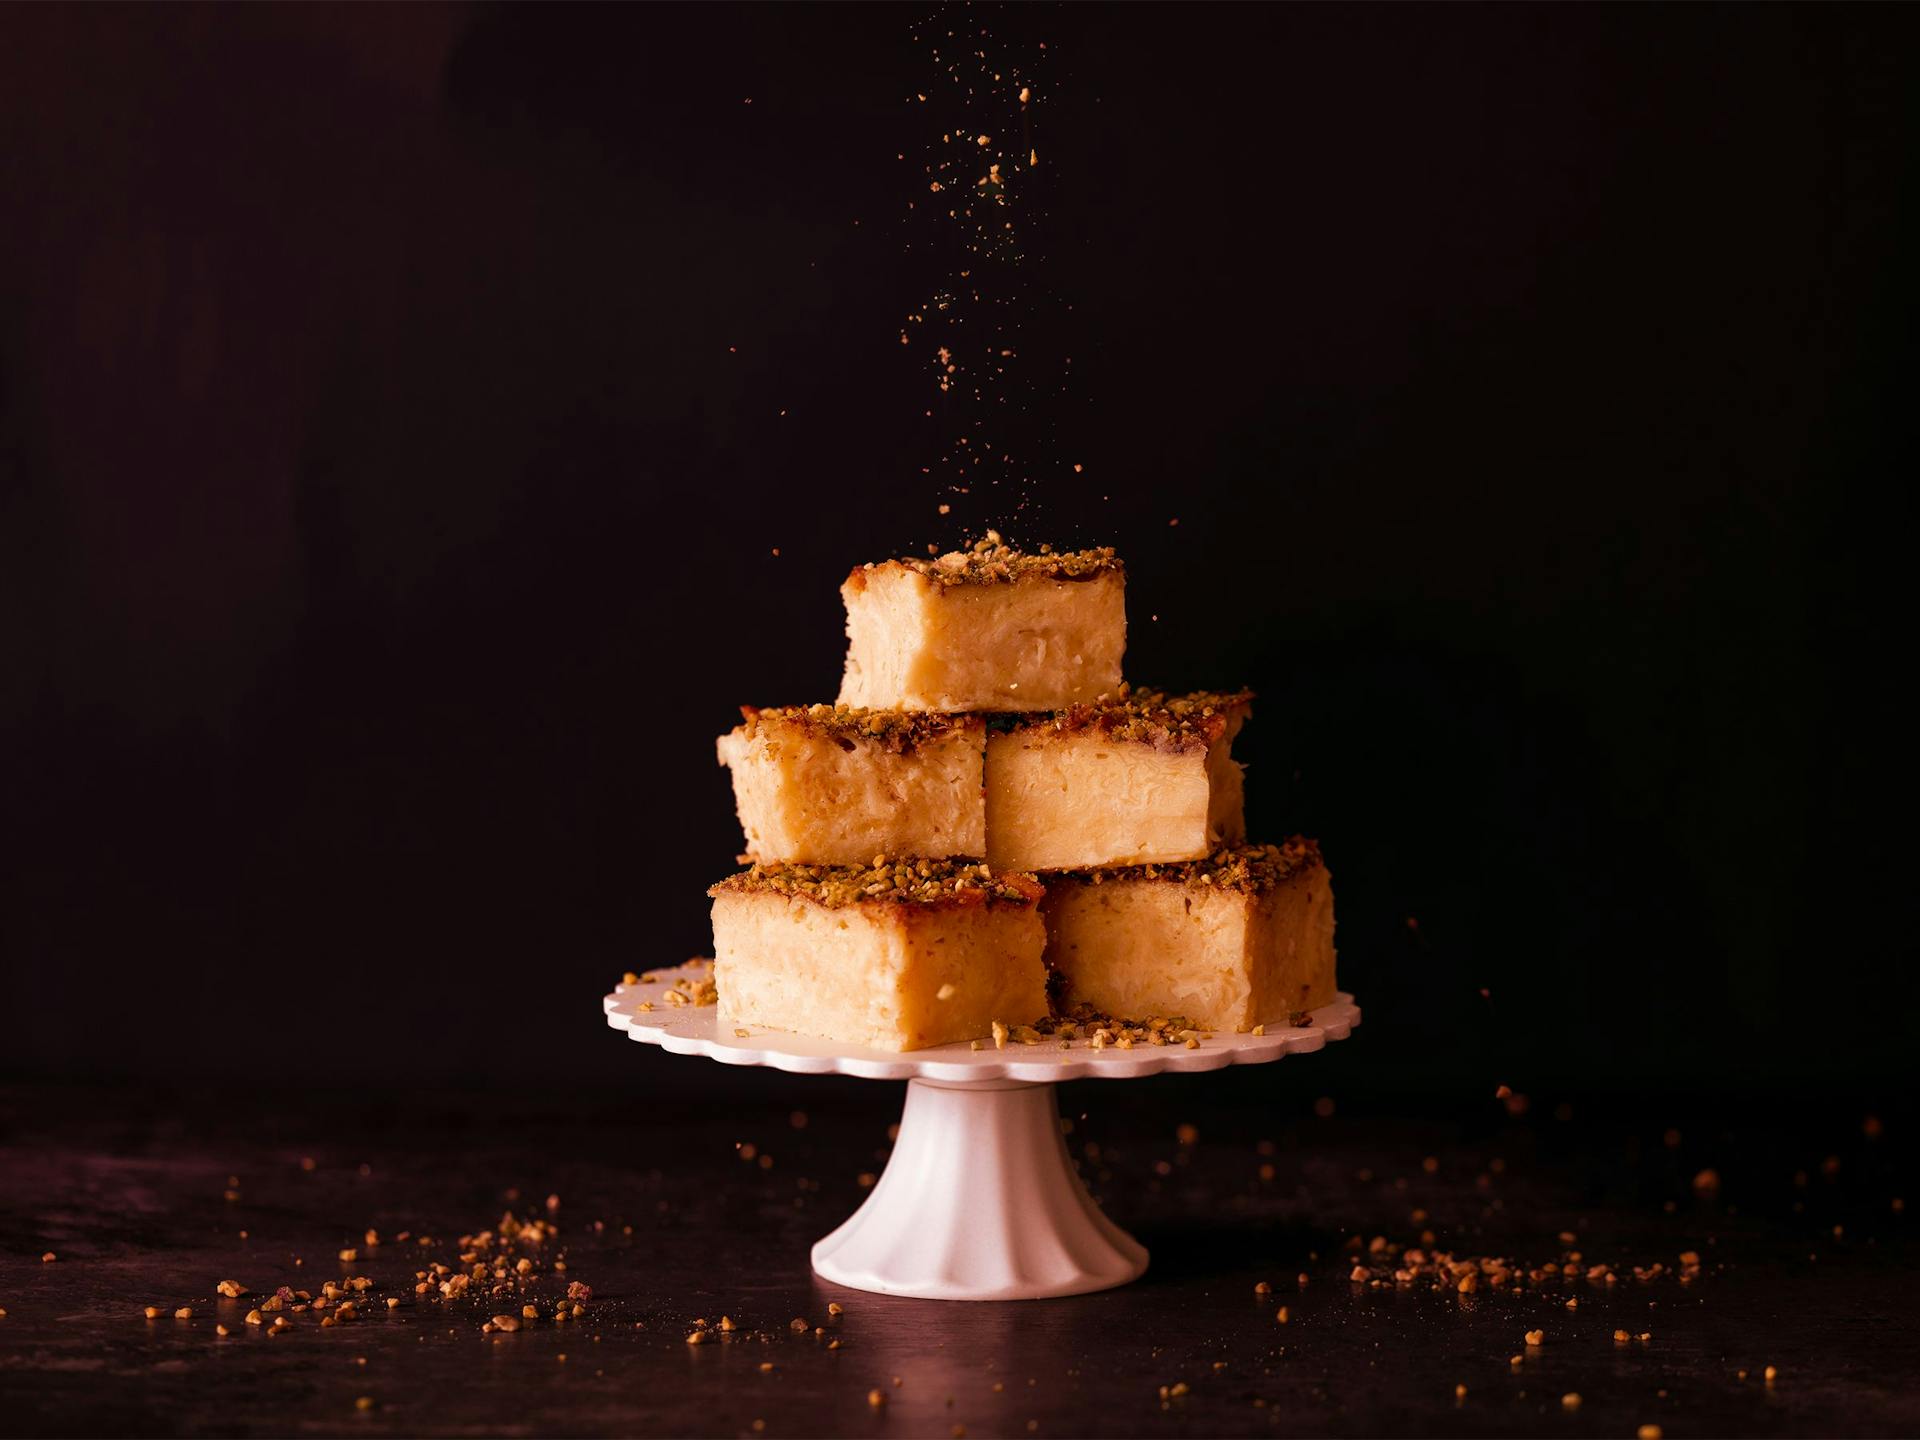 Soufra piled up on an elegant cake stand are sprinkled by chopped pistachios